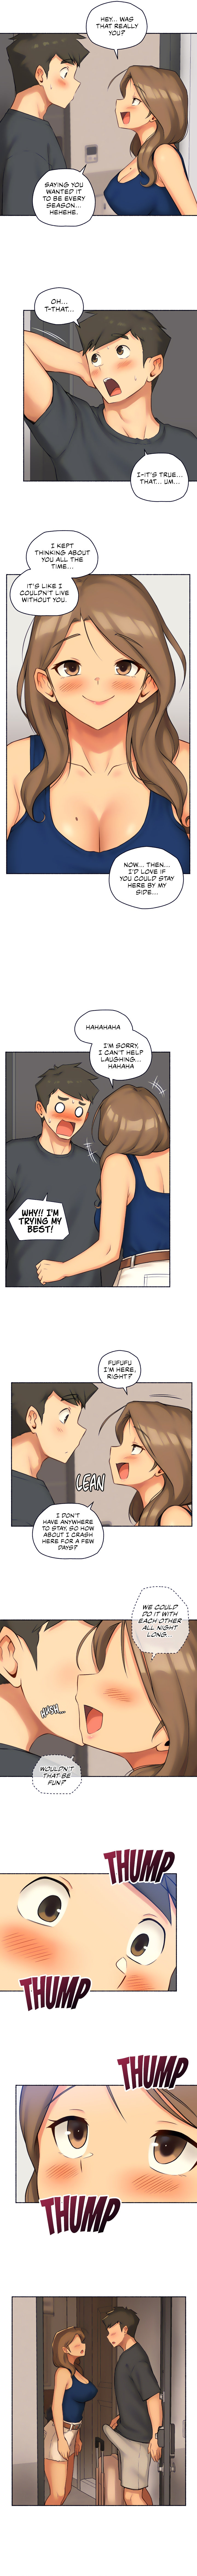 The Memories of that Summer Day - Chapter 5 Page 10